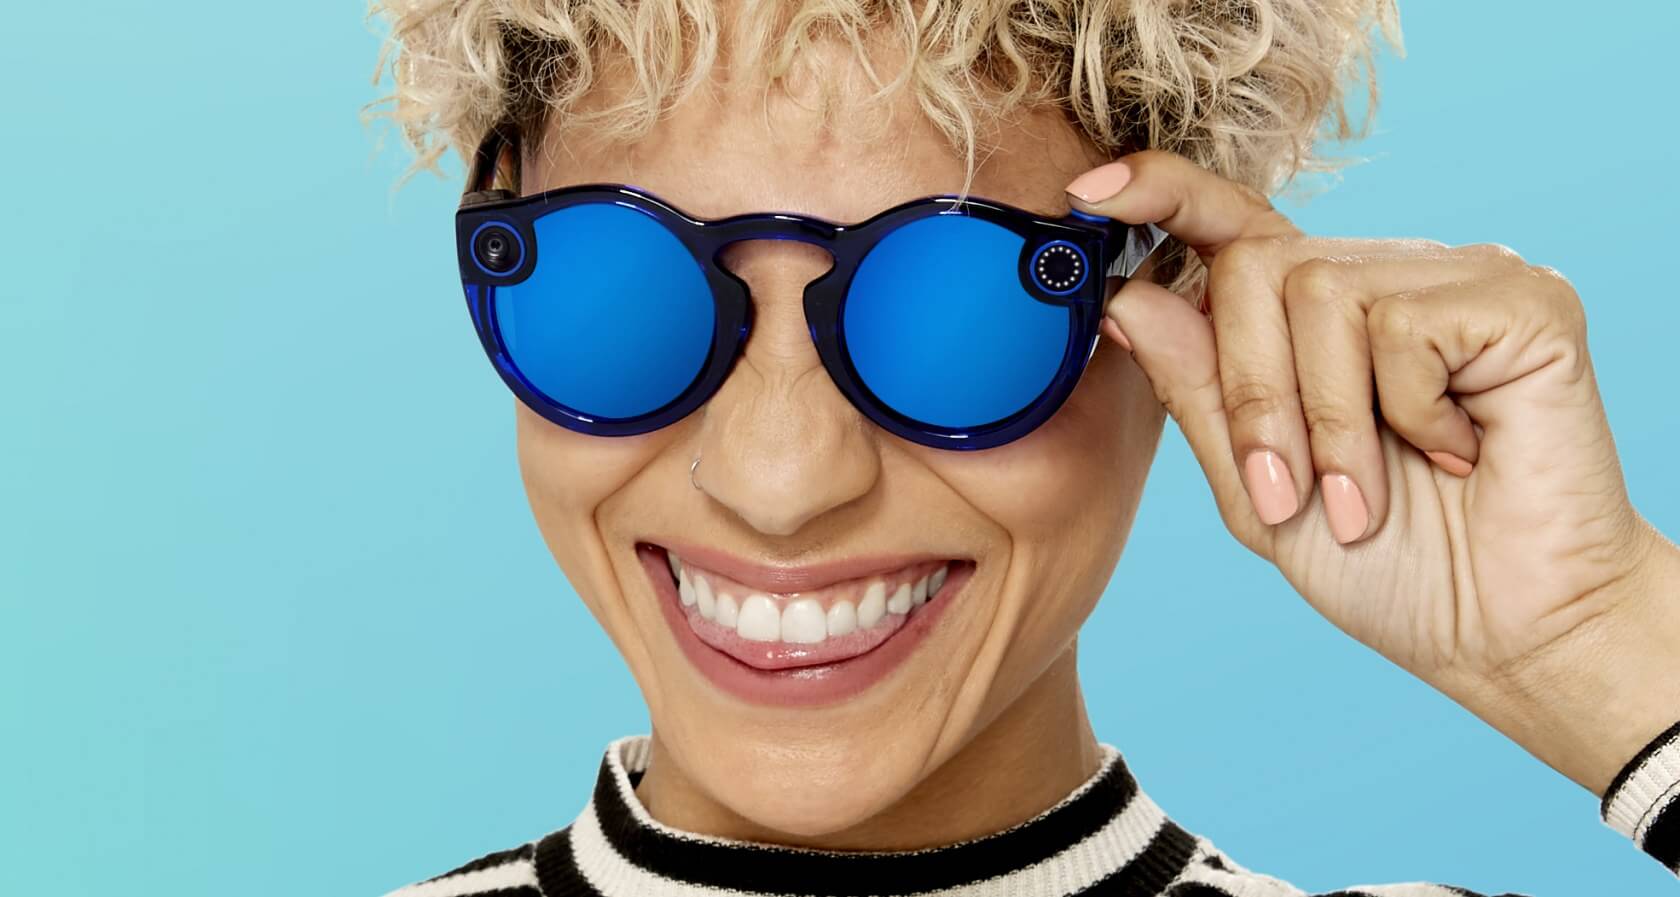 Snapchat launches its new and improved $150 Spectacles